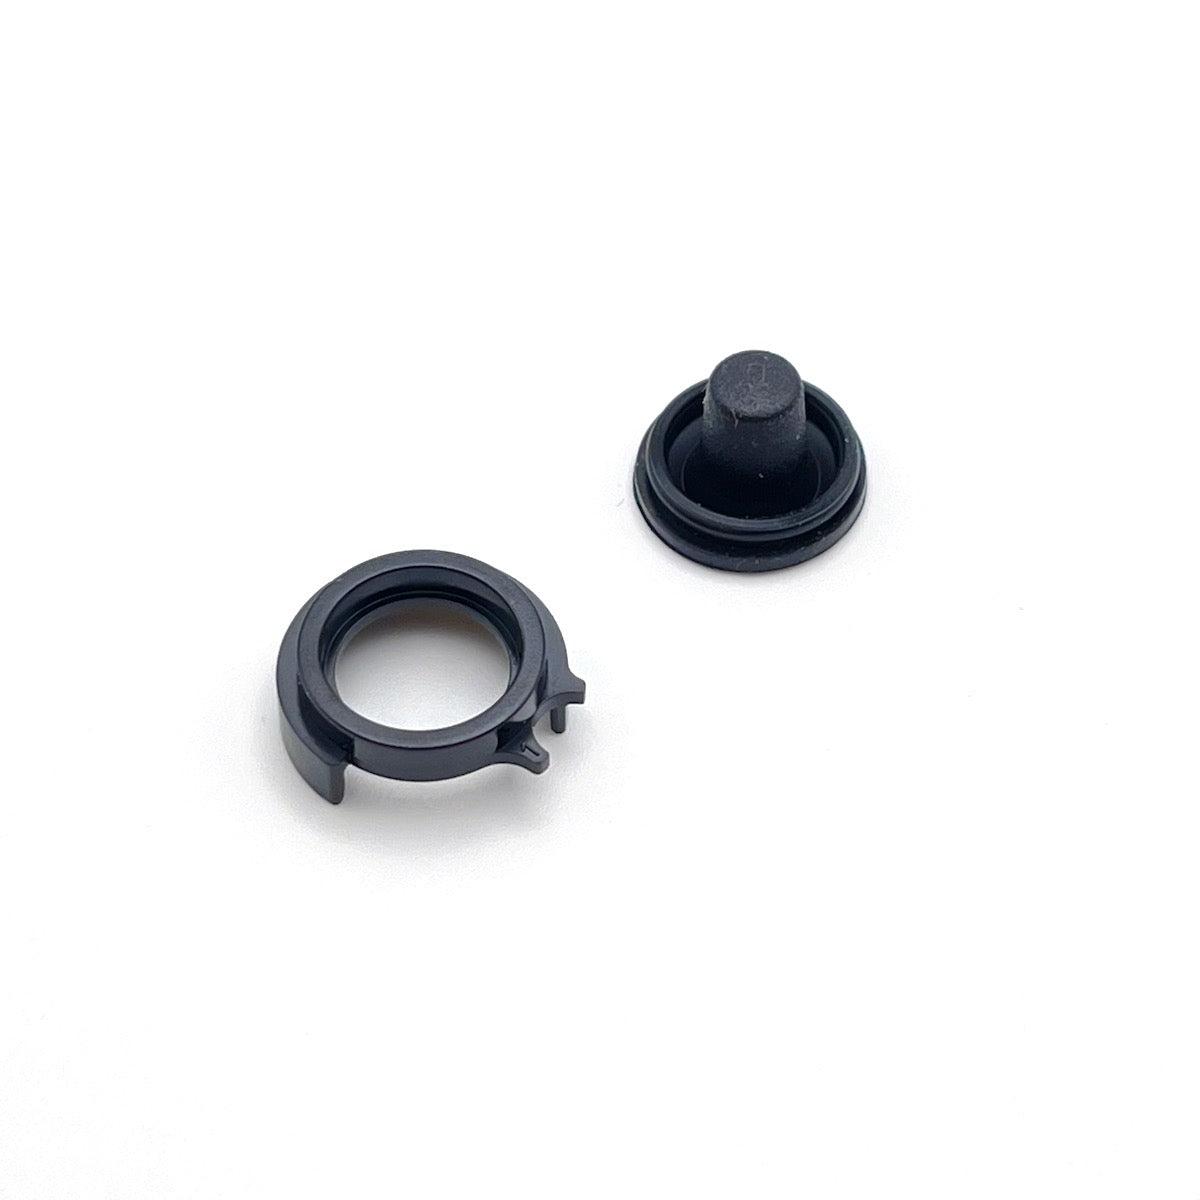 Rubber tumb stick with support Garmin eTrex 10 20 30 part repair rubber